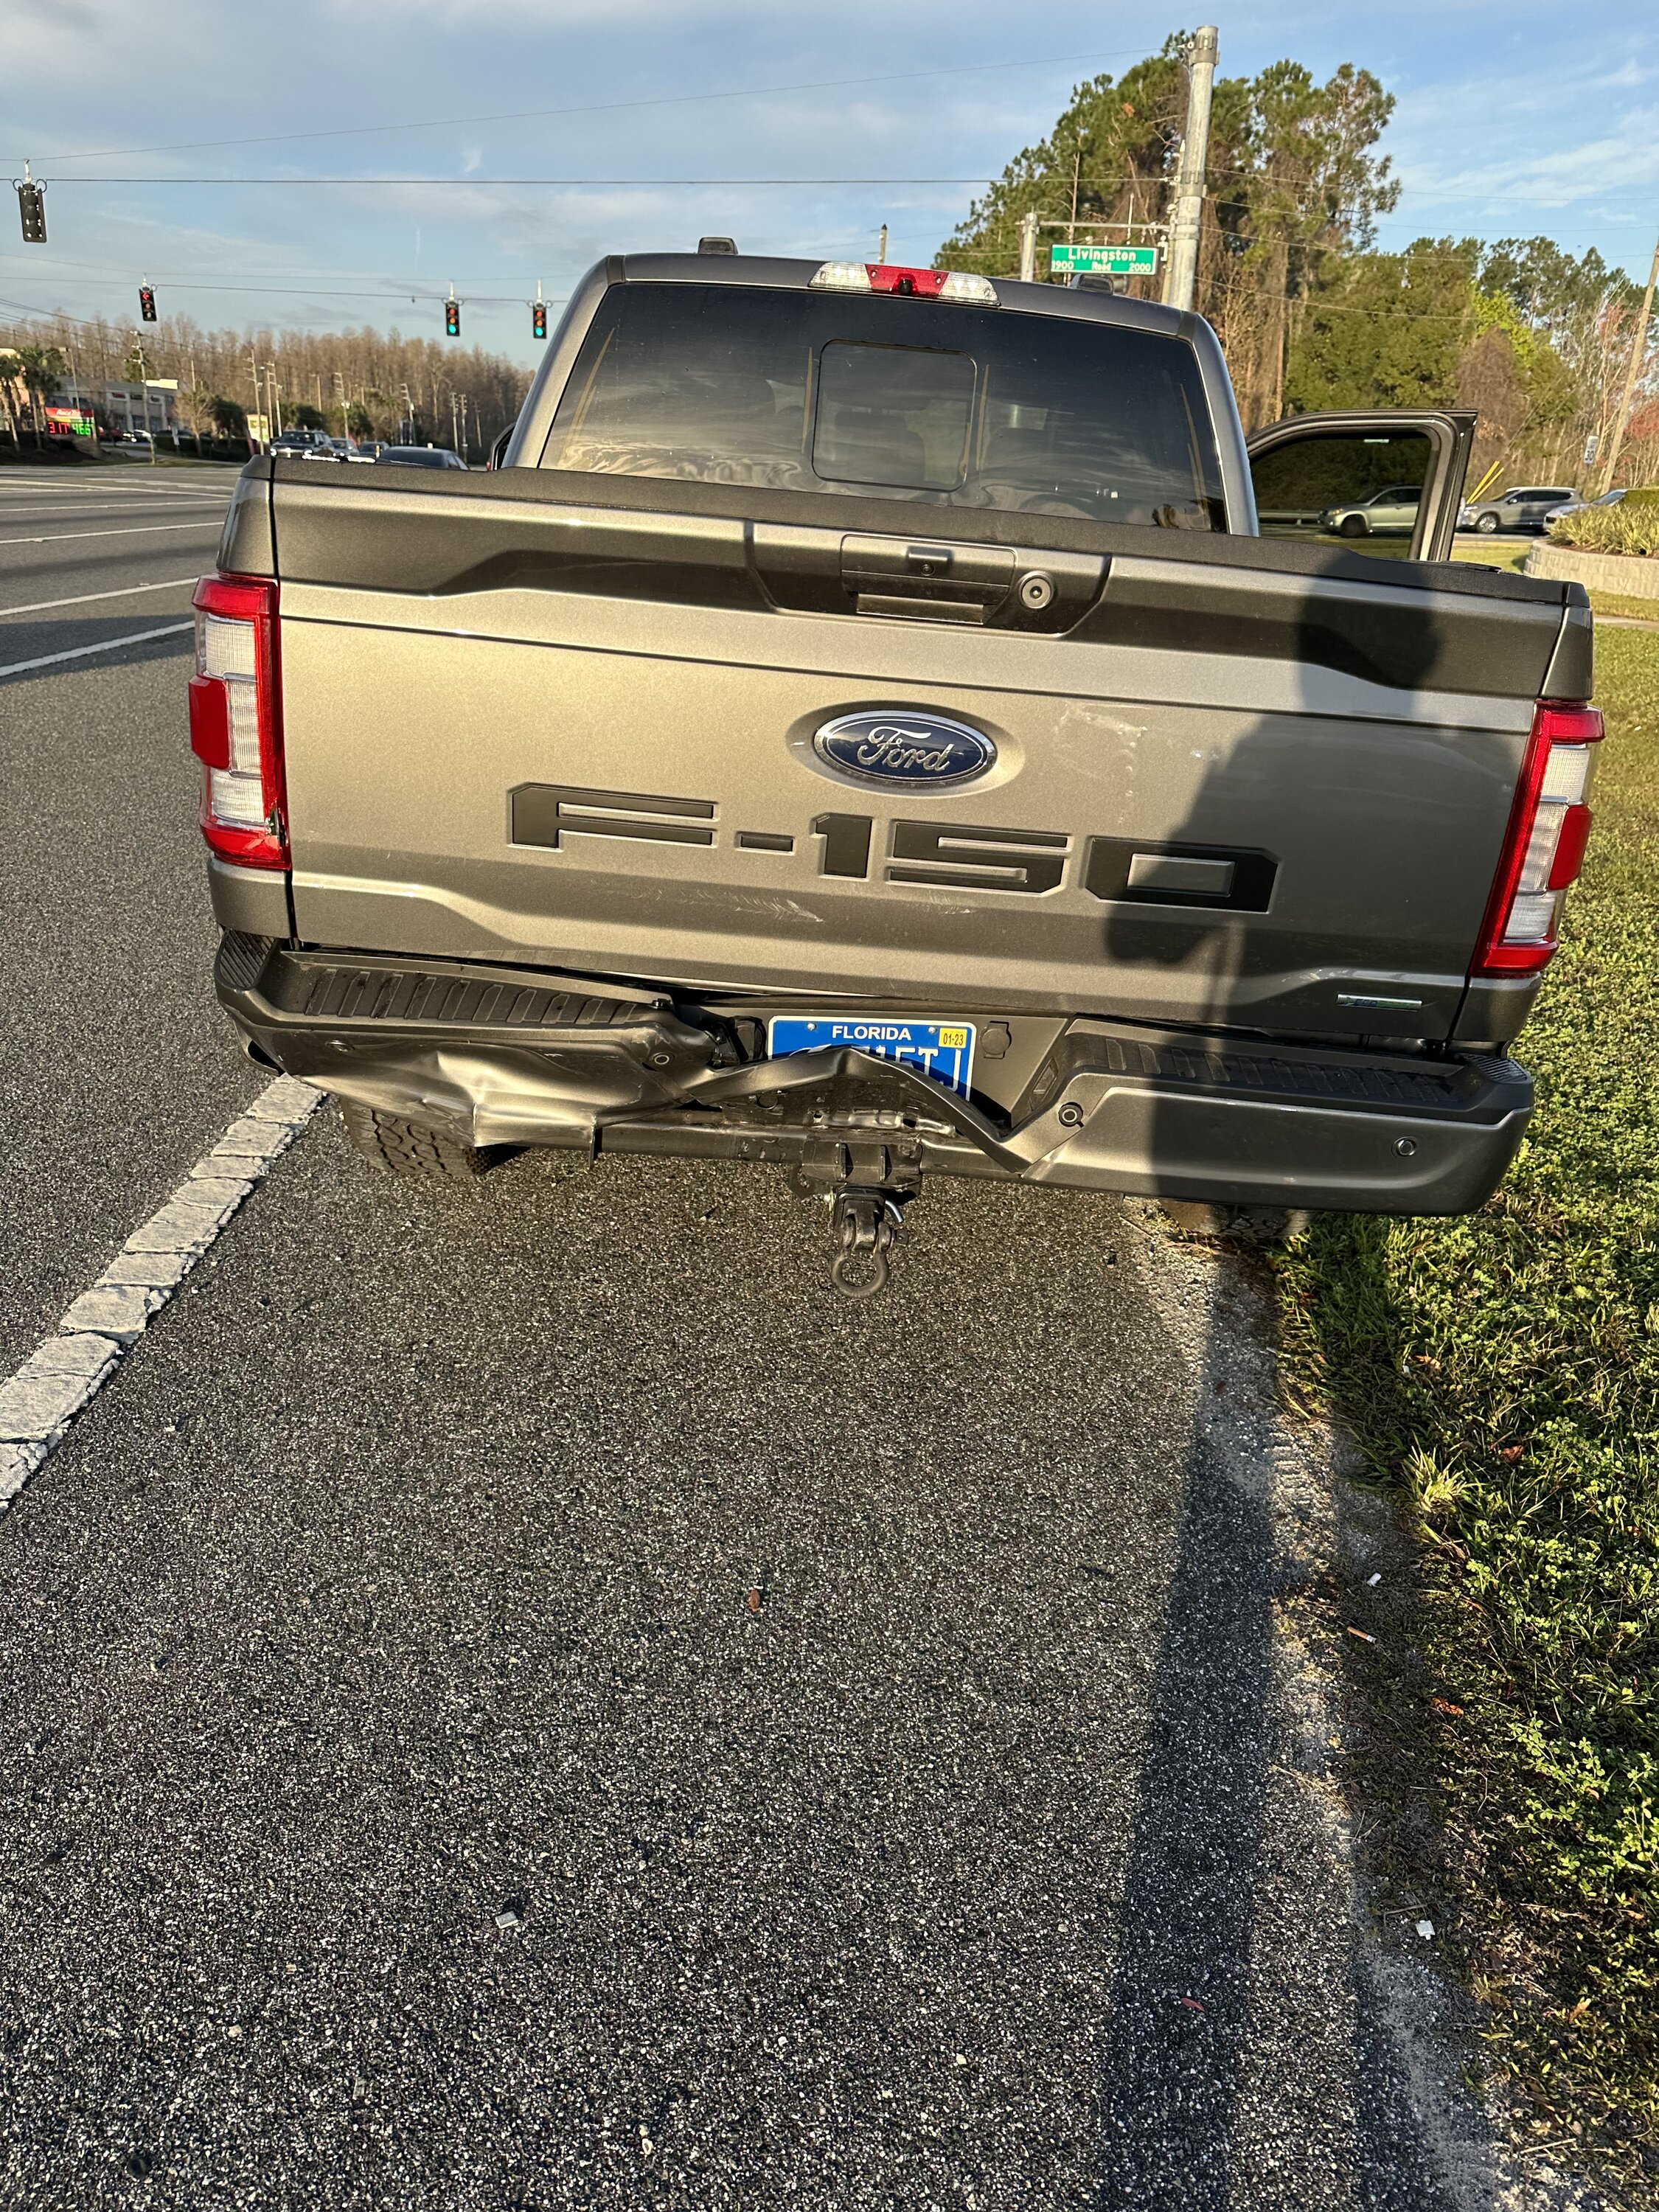 Ford F-150 Rear ended, how to best fix? DF7B2ADC-8655-46EF-AFDD-8D1A498A2341